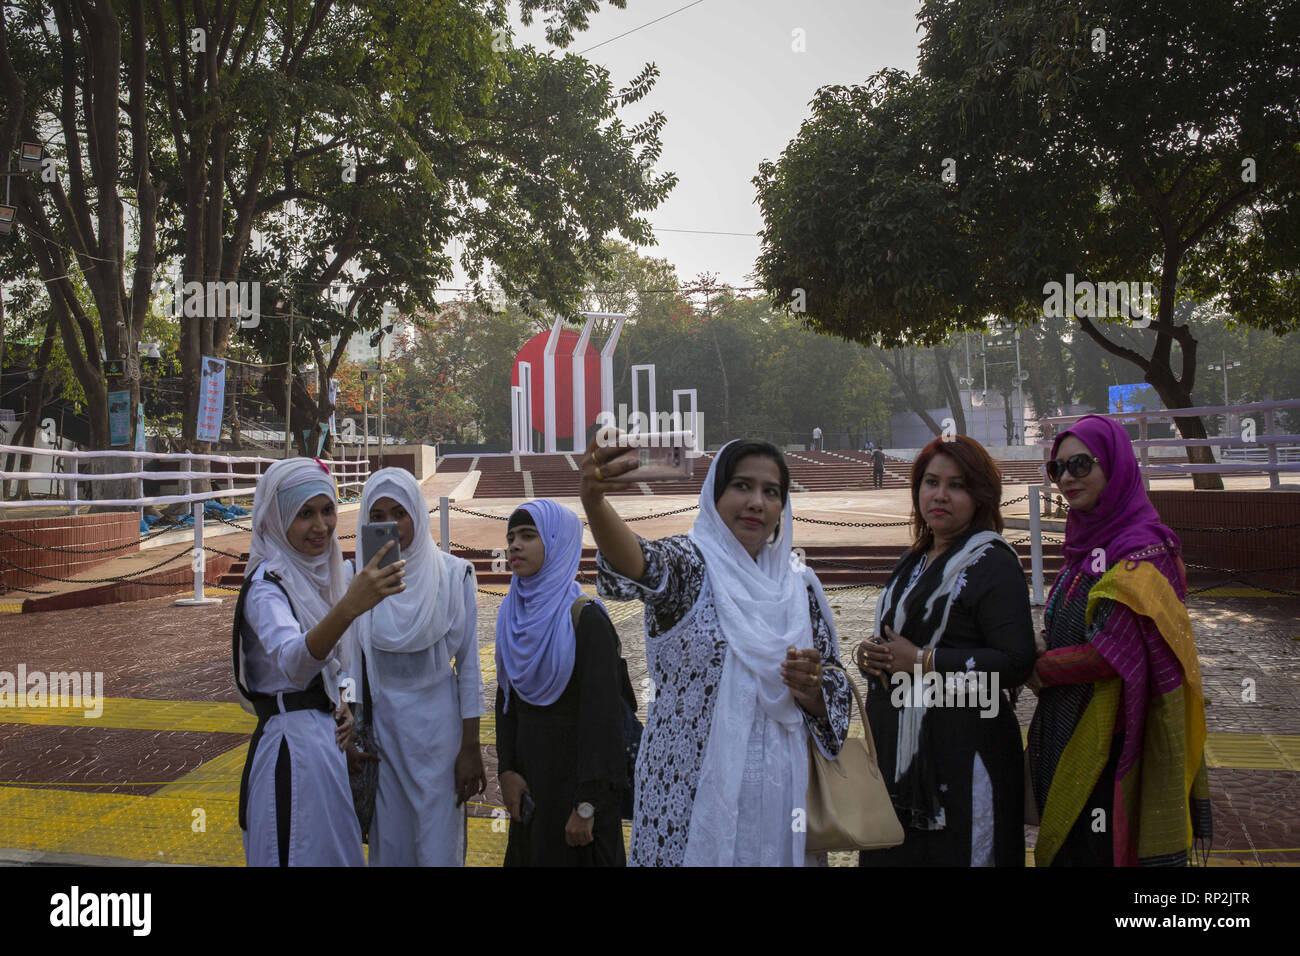 Dhaka, Bangladesh. 20th Feb, 2019. FEBRUARY 20 : Bangladeshi people take selfie in front of the language matyrs monument in Dhaka, Bangladesh on February 20, 2019.The nation will pay tribute to the Bangla language movement martyrs who sacrificed their life for their mother tongue in 1952, while the United Nations Educational Scientific and Cultural Organization (UNESCO) declared 21 February as the International Mother Language Day. Credit: Zakir Hossain Chowdhury/ZUMA Wire/Alamy Live News Stock Photo